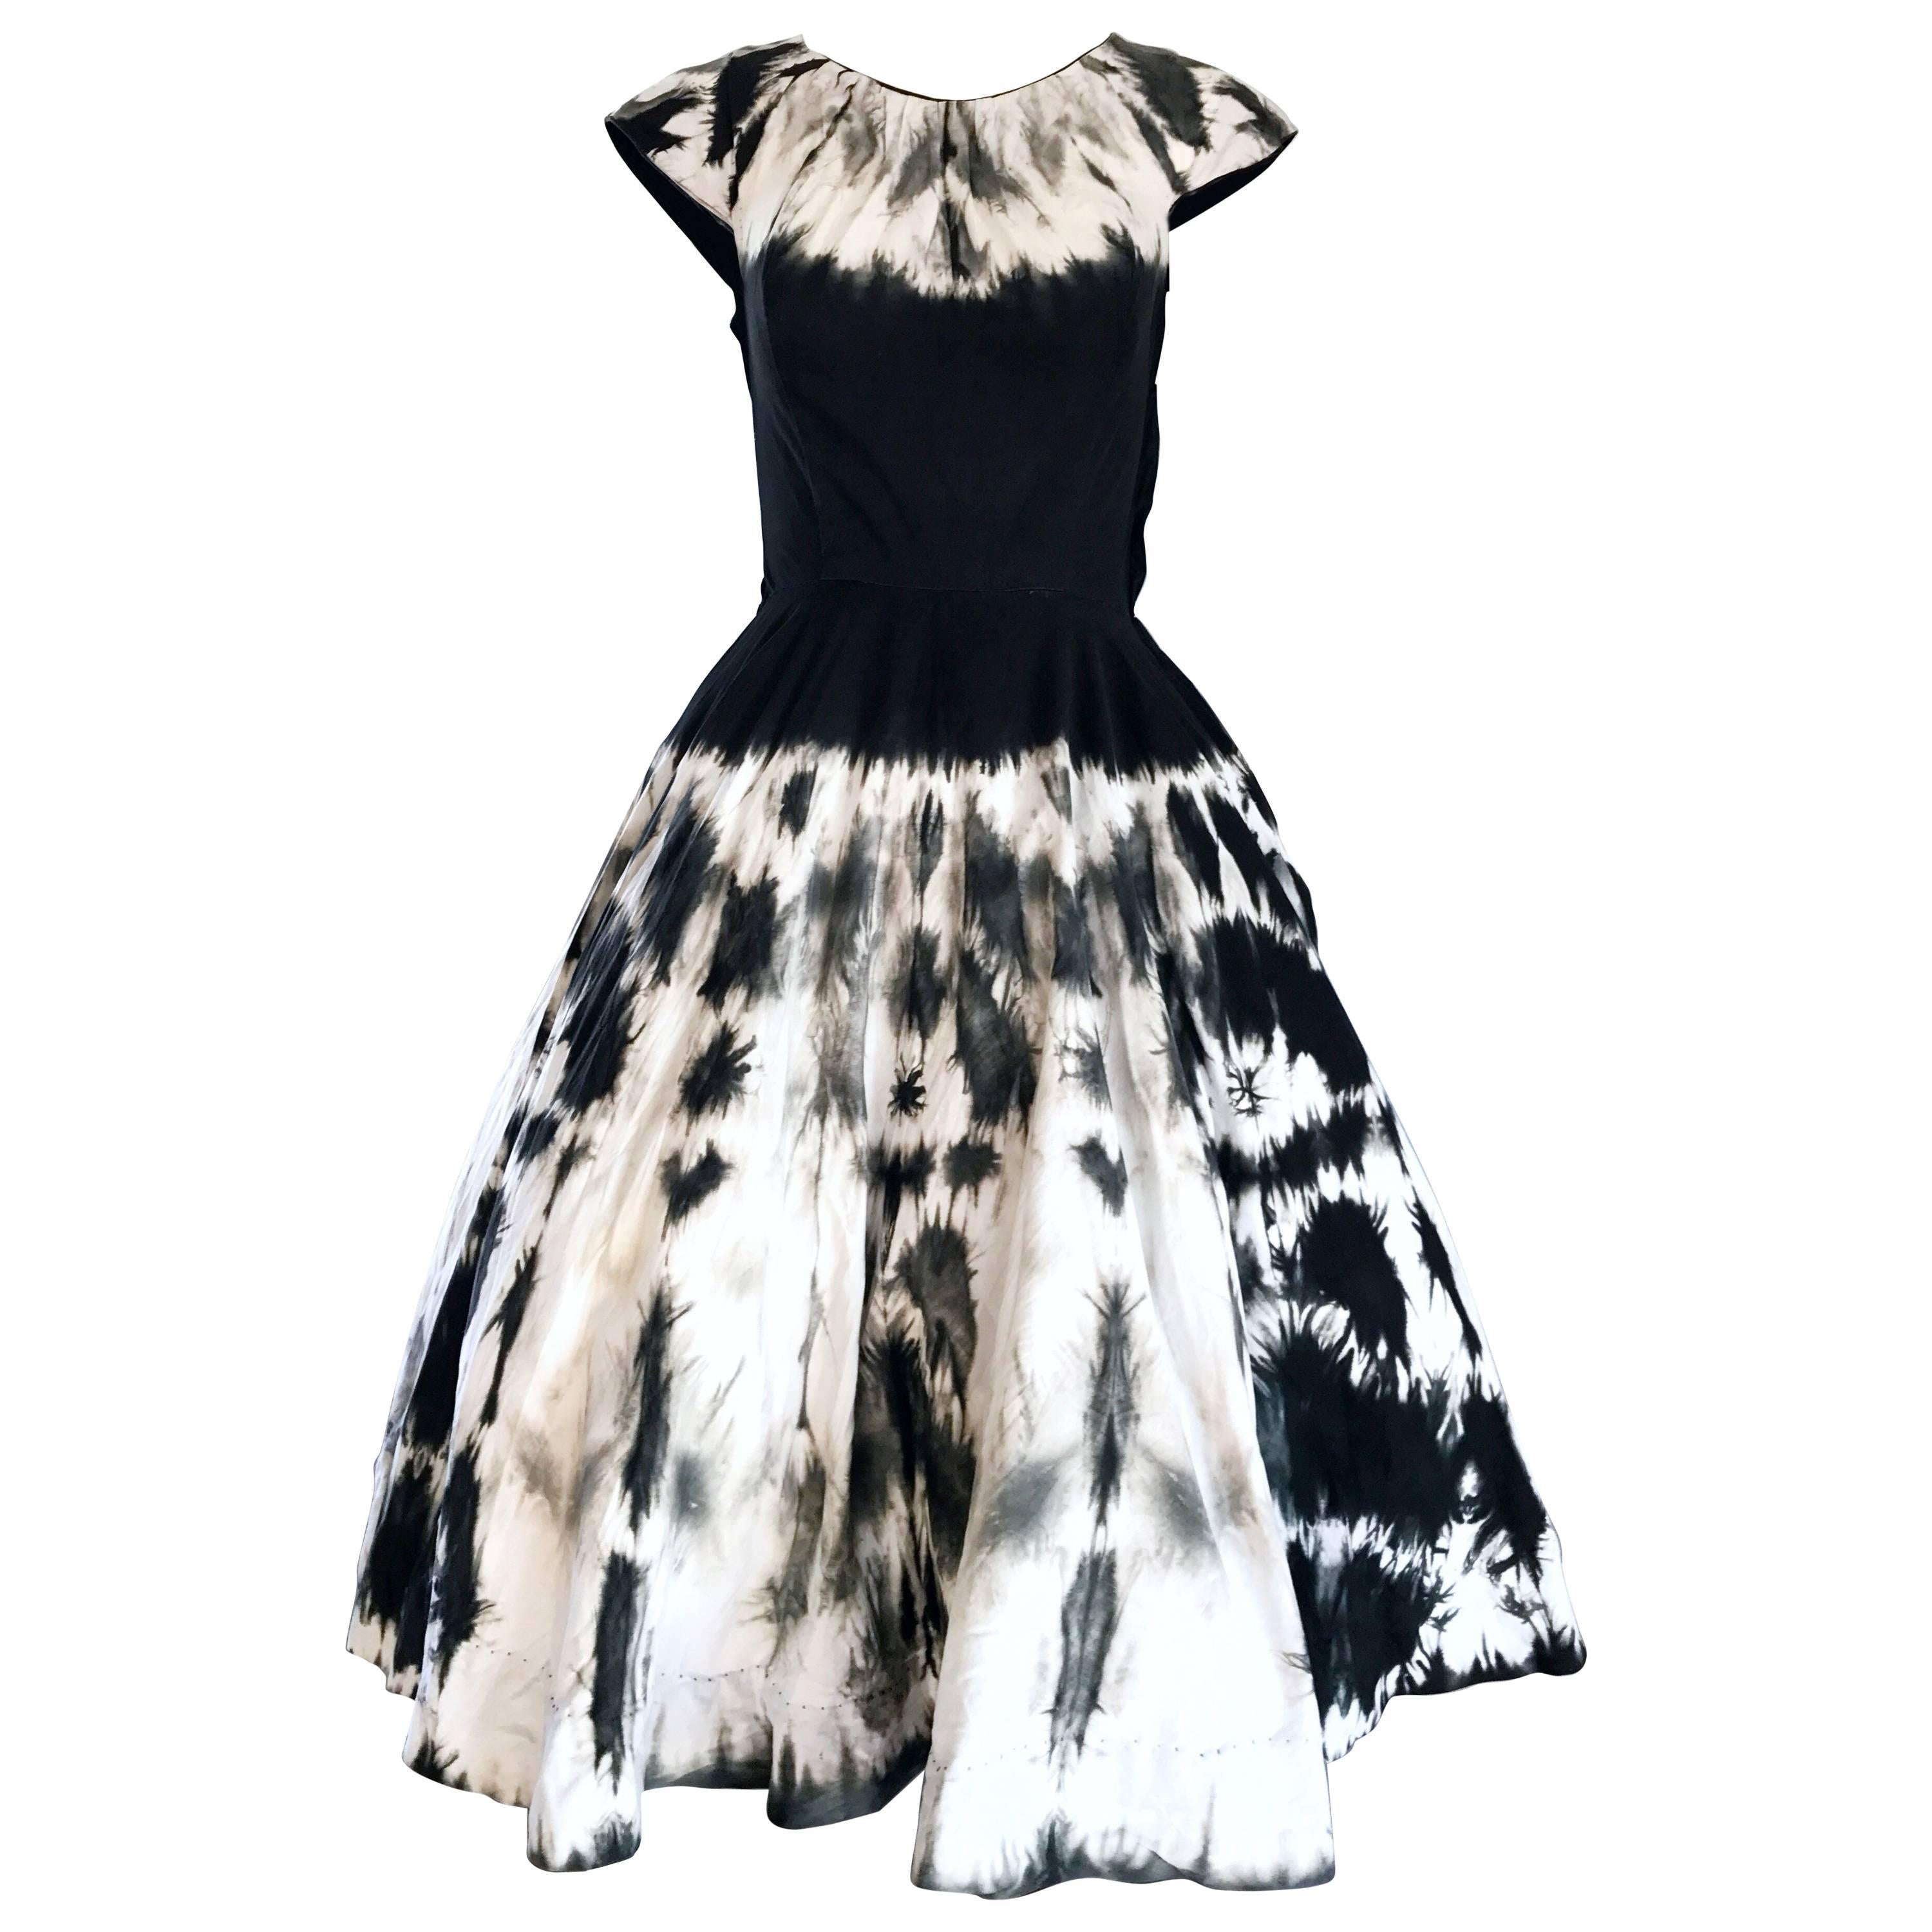 1950s Madalyn Miller 1950s Black and White Tie Dye Cotton Chic Vintage 50s Dress